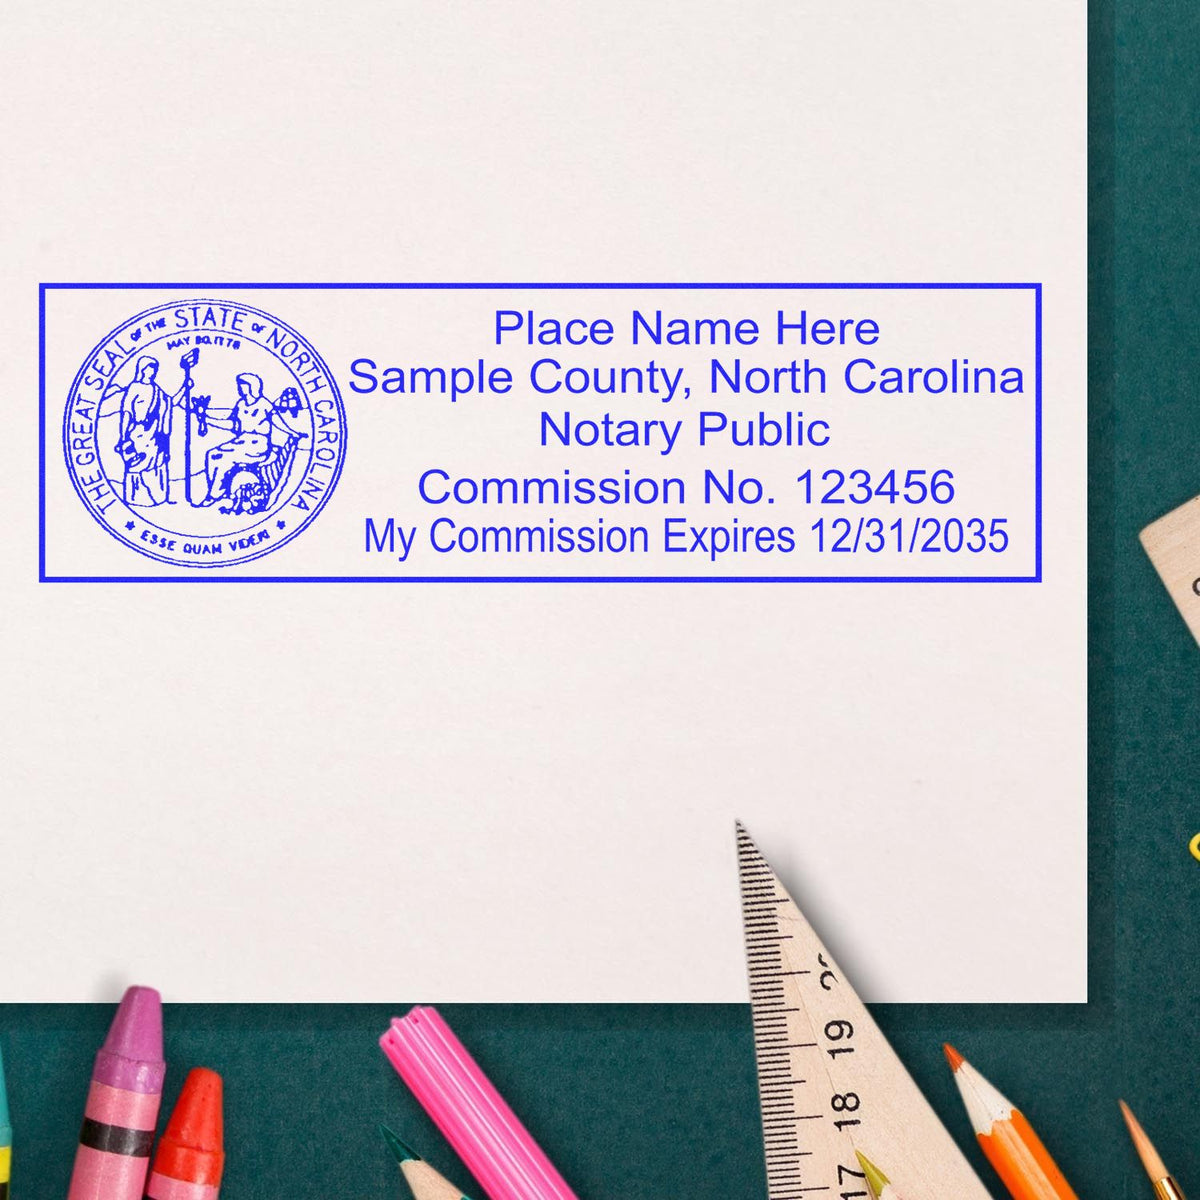 The MaxLight Premium Pre-Inked North Carolina State Seal Notarial Stamp stamp impression comes to life with a crisp, detailed photo on paper - showcasing true professional quality.